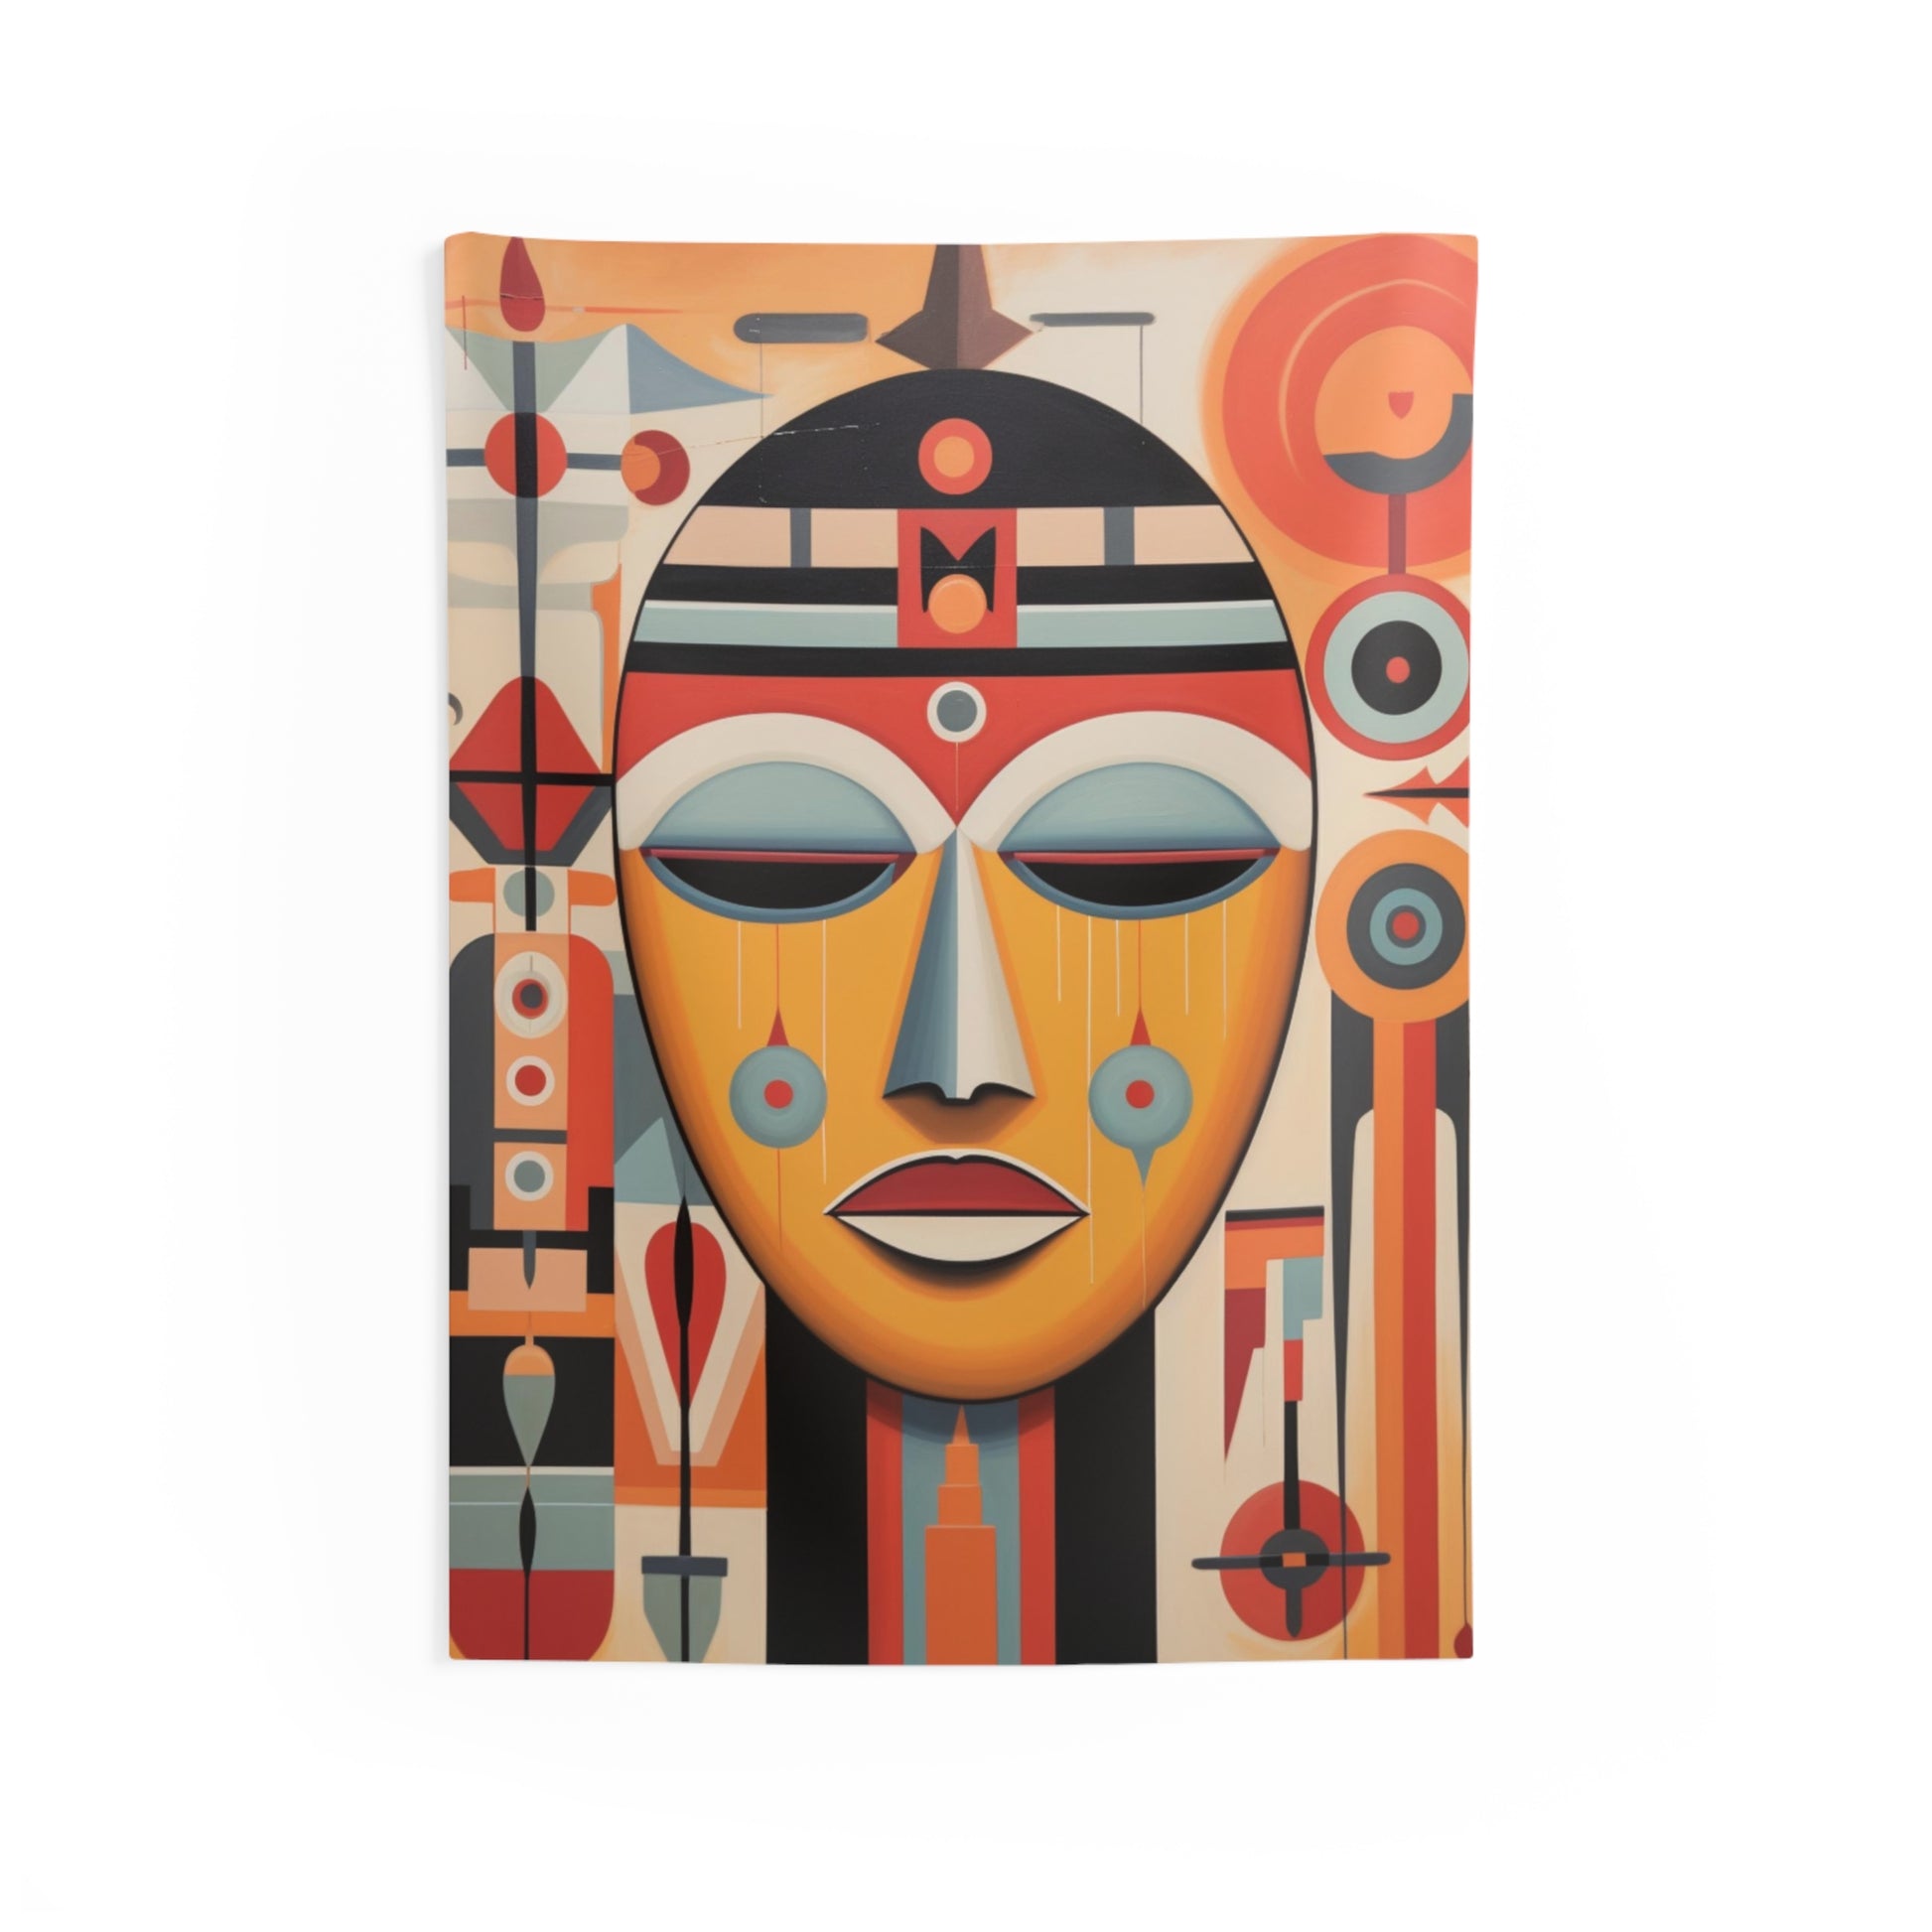 Navajo Tapestry, Totem Native American Indian Wall Art Hanging Cool Unique Vertical Aesthetic Large Small Decor Bedroom College Dorm Room Starcove Fashion